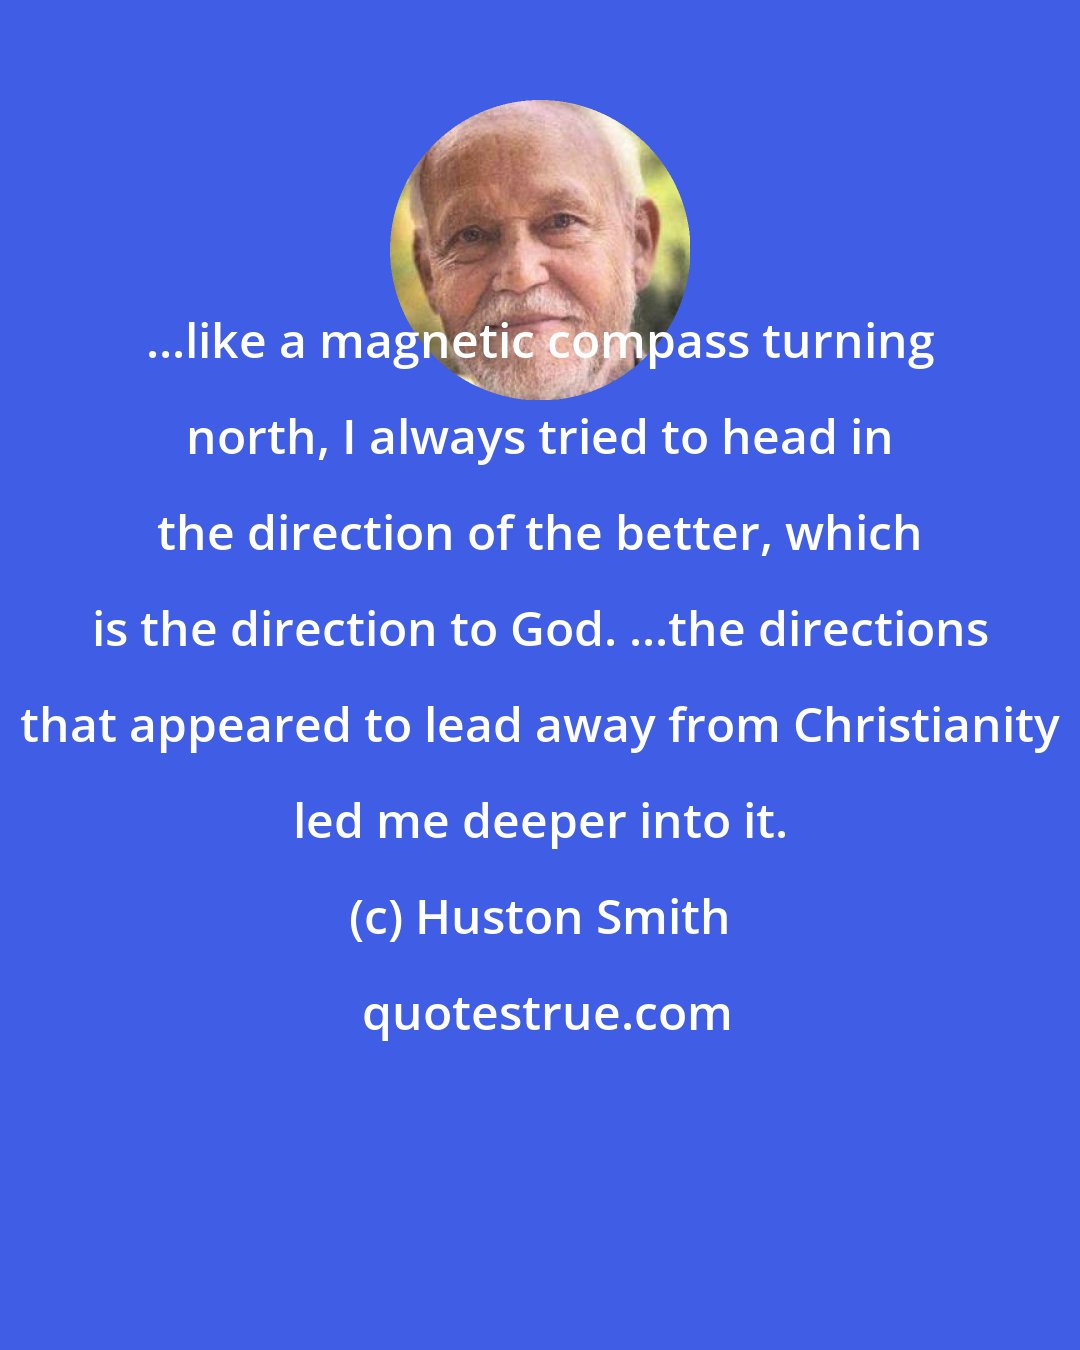 Huston Smith: ...like a magnetic compass turning north, I always tried to head in the direction of the better, which is the direction to God. ...the directions that appeared to lead away from Christianity led me deeper into it.